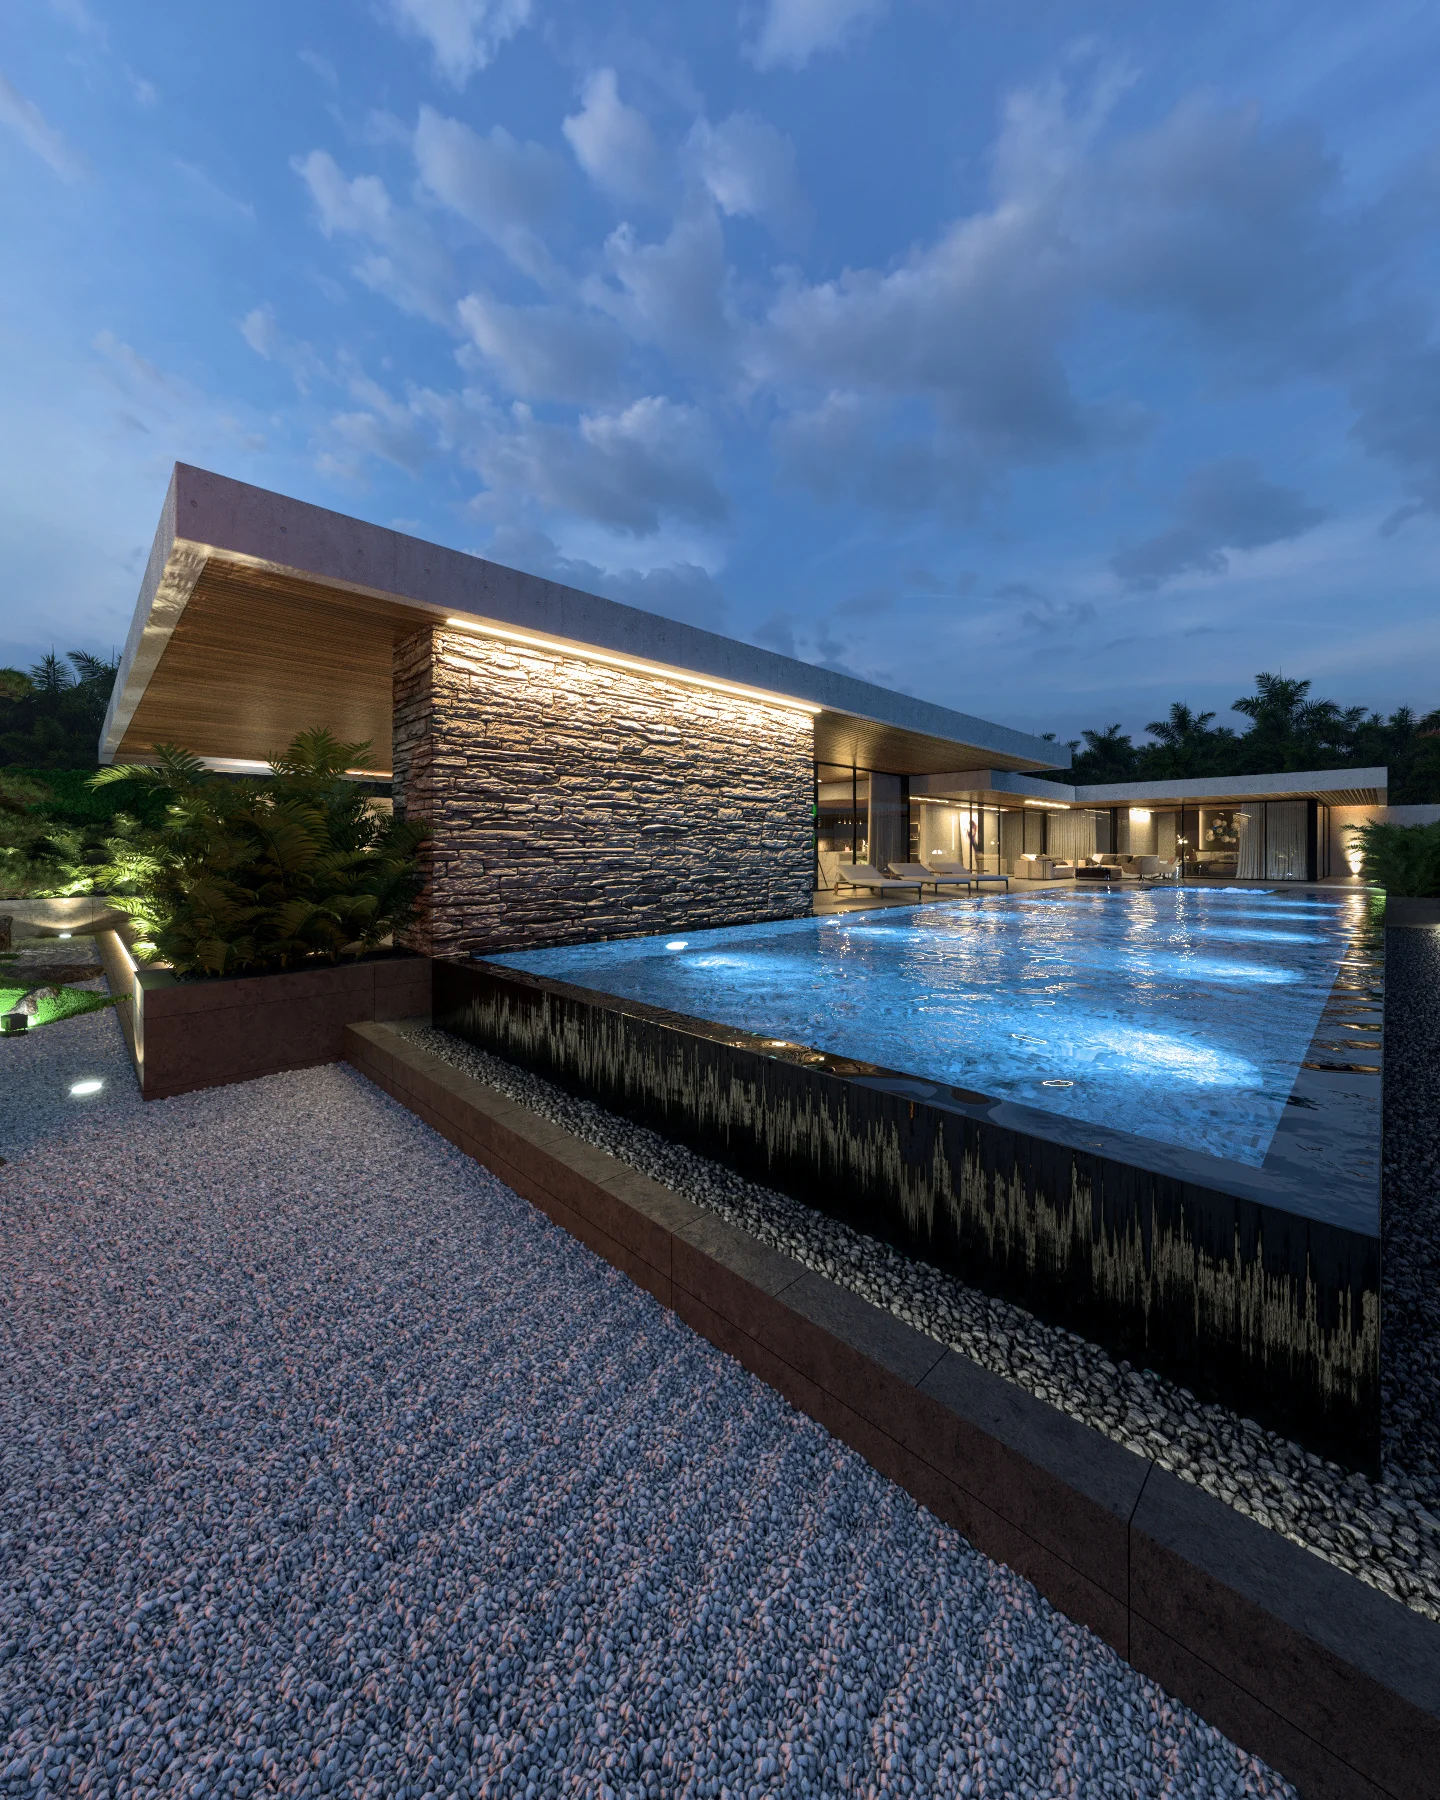 Single story house in Thailand Infinity pool night